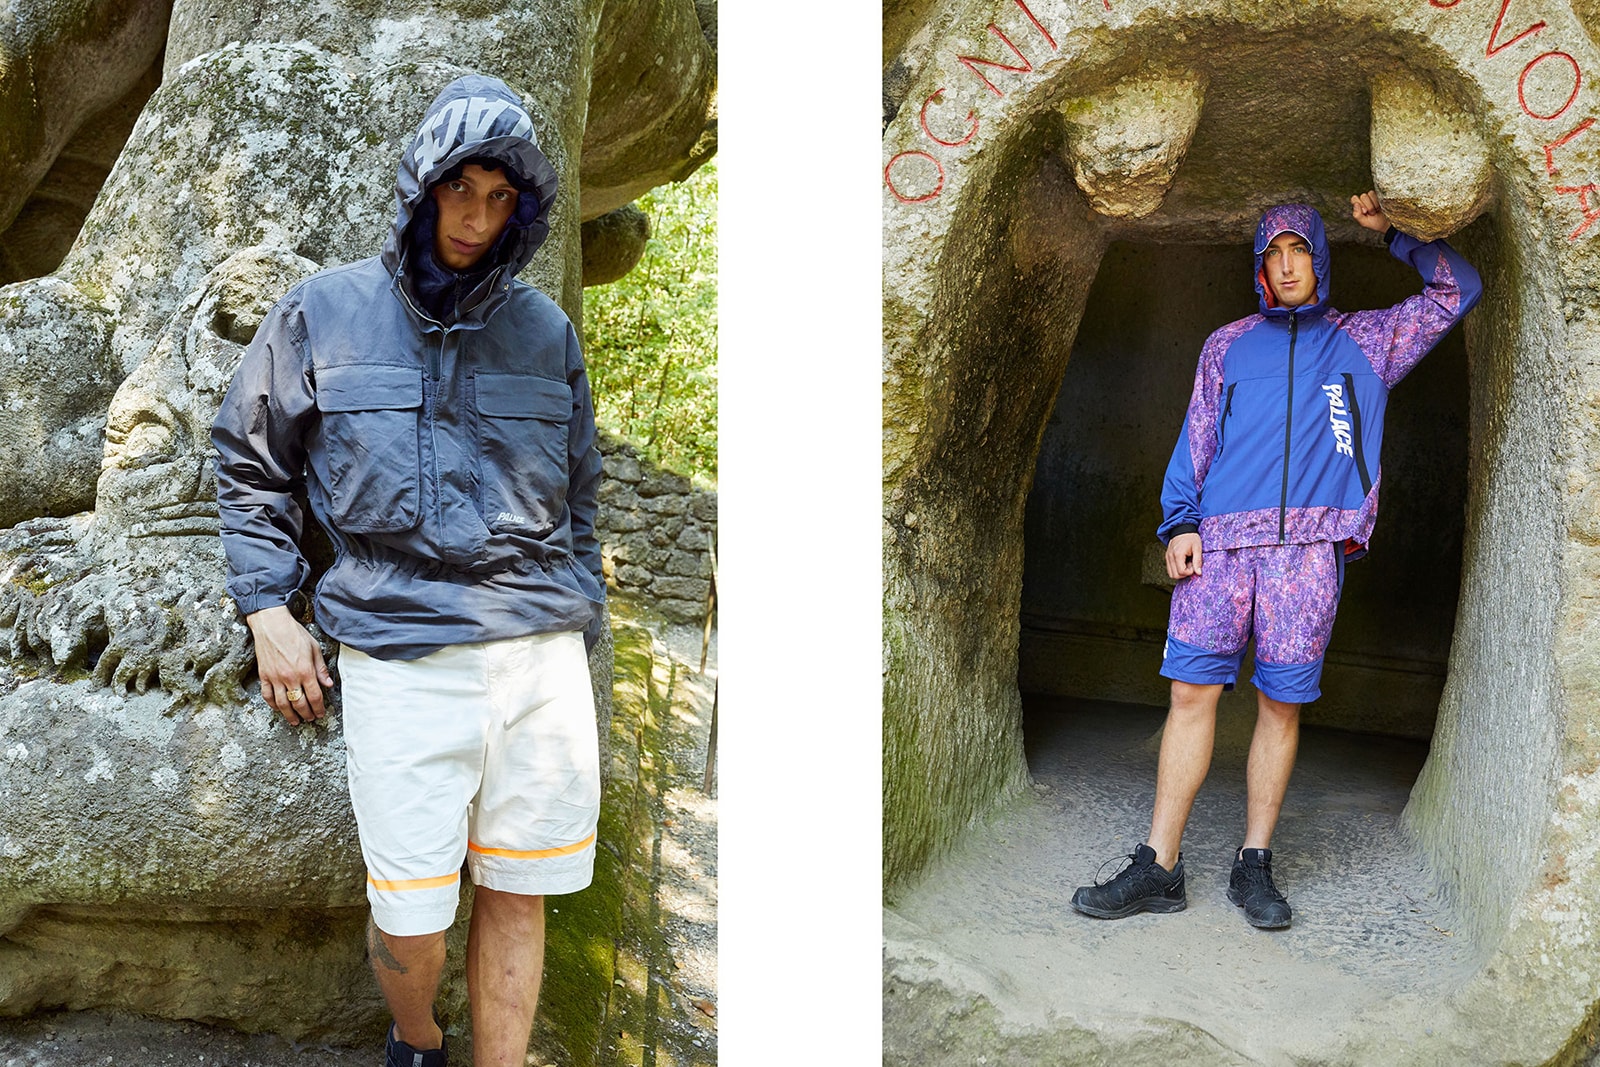 Palace Skateboards Fall Autumn 2018 Juergen Teller Lookbook Clothing Fashion Collection Blondey McCoy Lucien Clarke Rory Milanes Fergus Purcell Lev Tanju Release Information Details New York Tokyo London online web store shirt jacket hoodie T-shirt graphic print